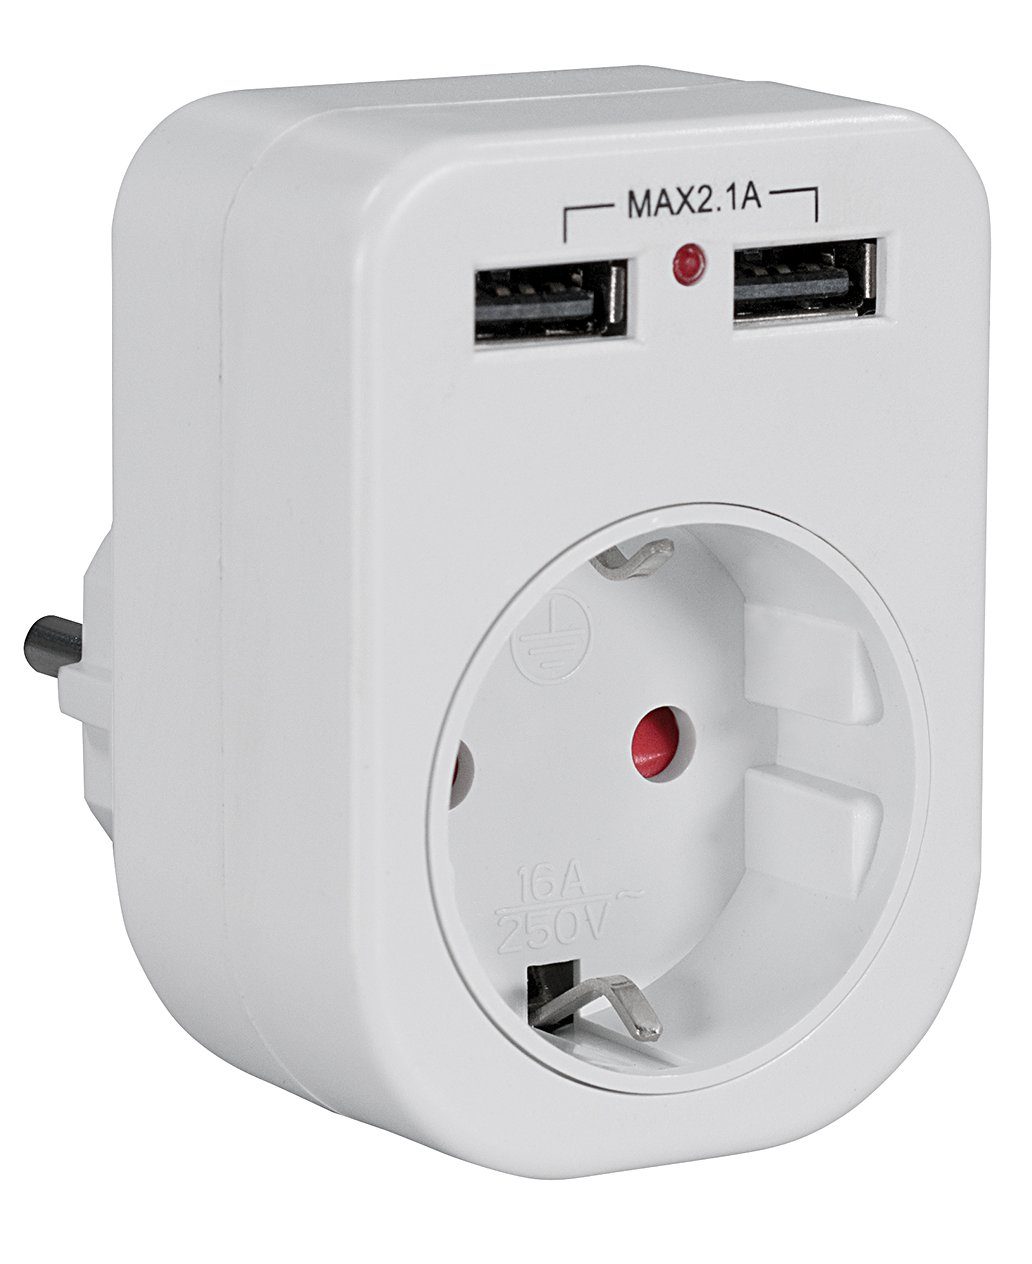 Ladeadapter Mehrfachsteckdose, USB 2,1A Maxtrack